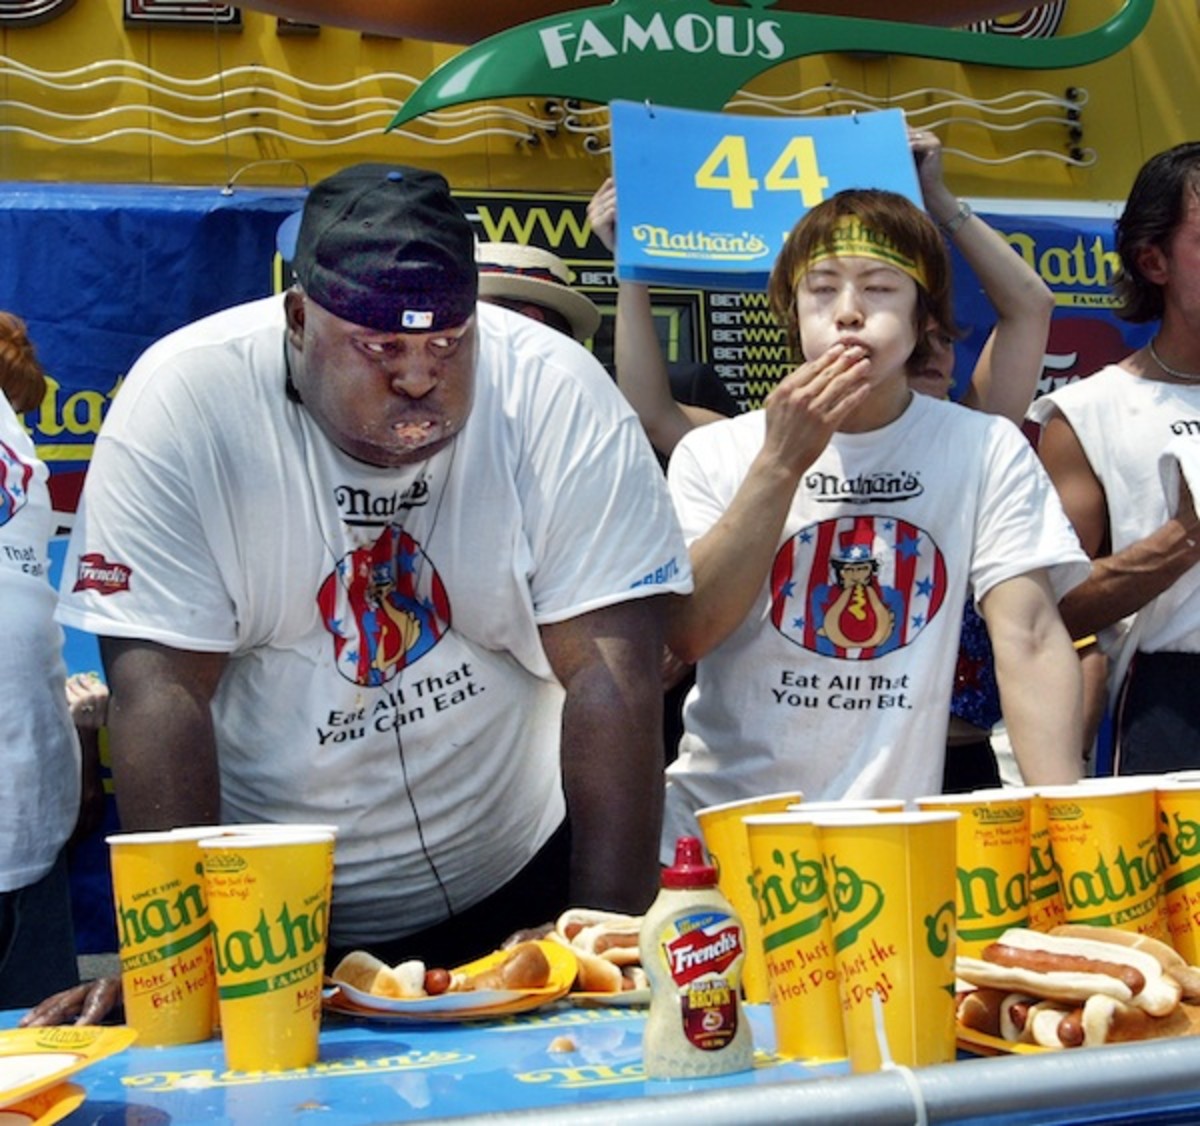 15 of the Most Pained Facial Expressions from the Nathan's Hot Dog